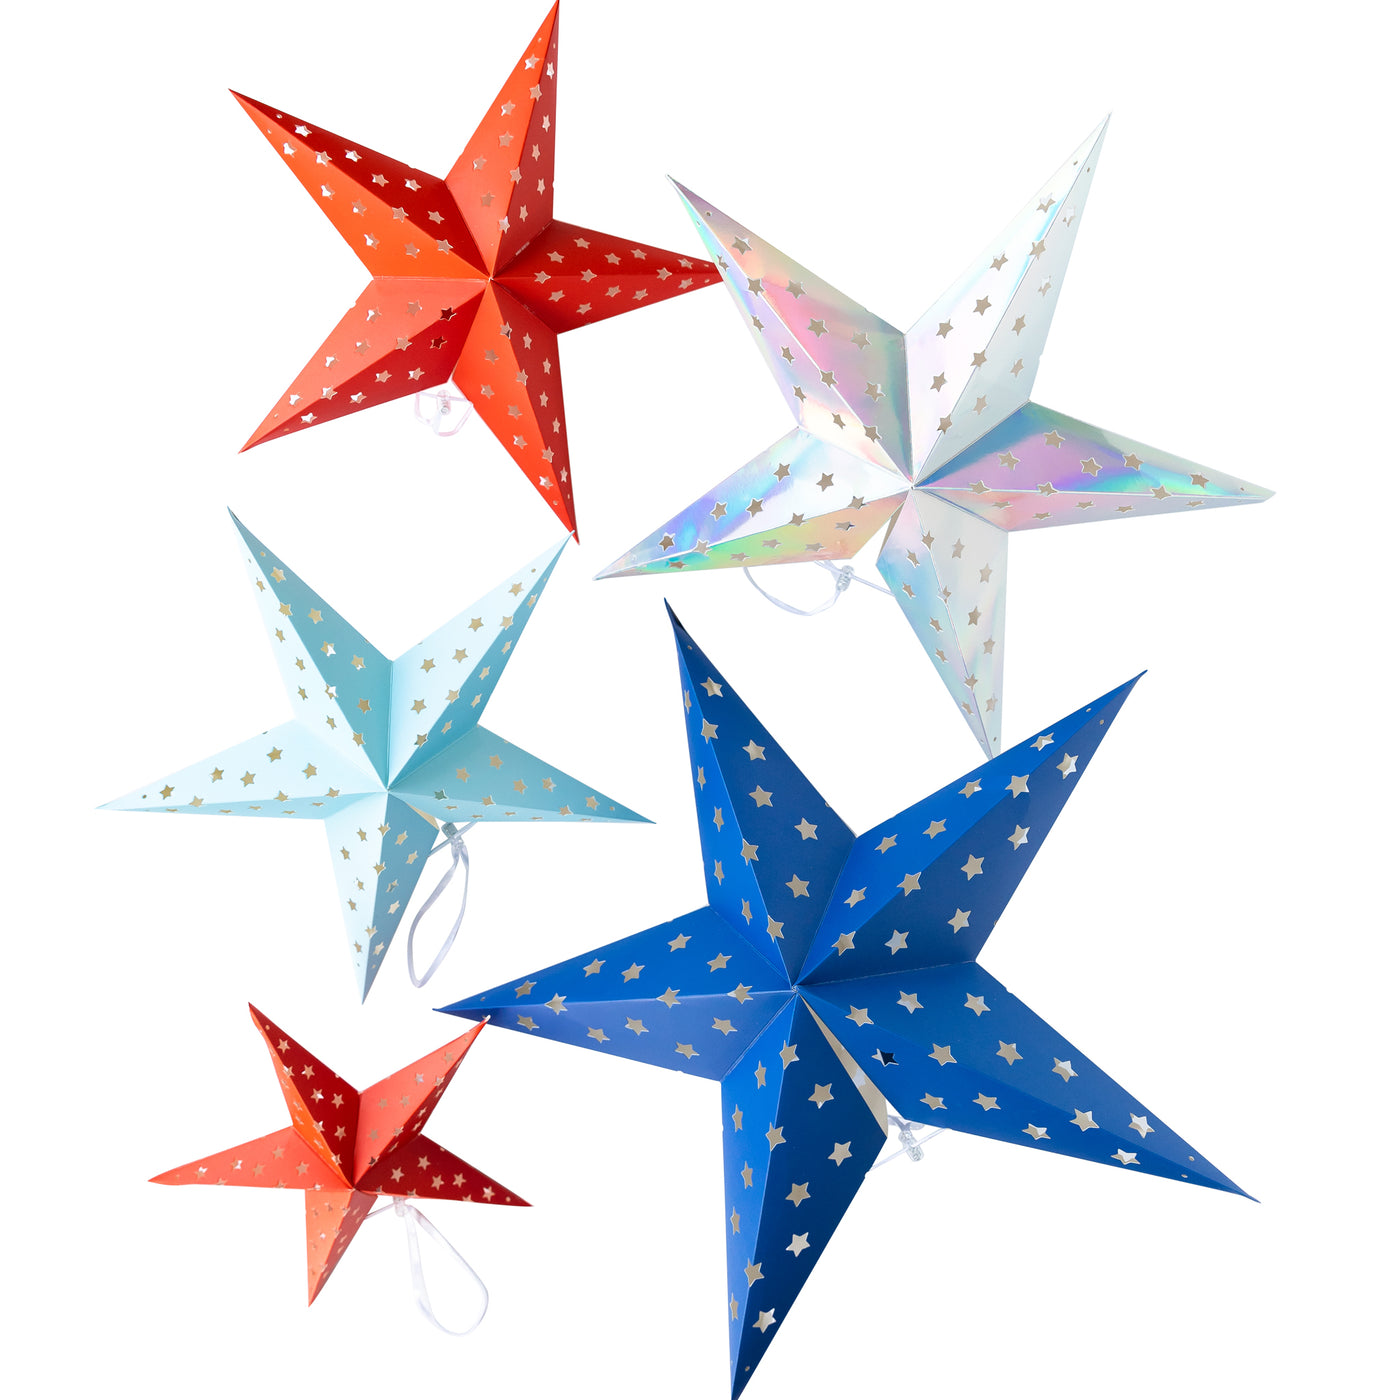 ROC902 - Sparklers and Rockets Decorative Hanging Stars